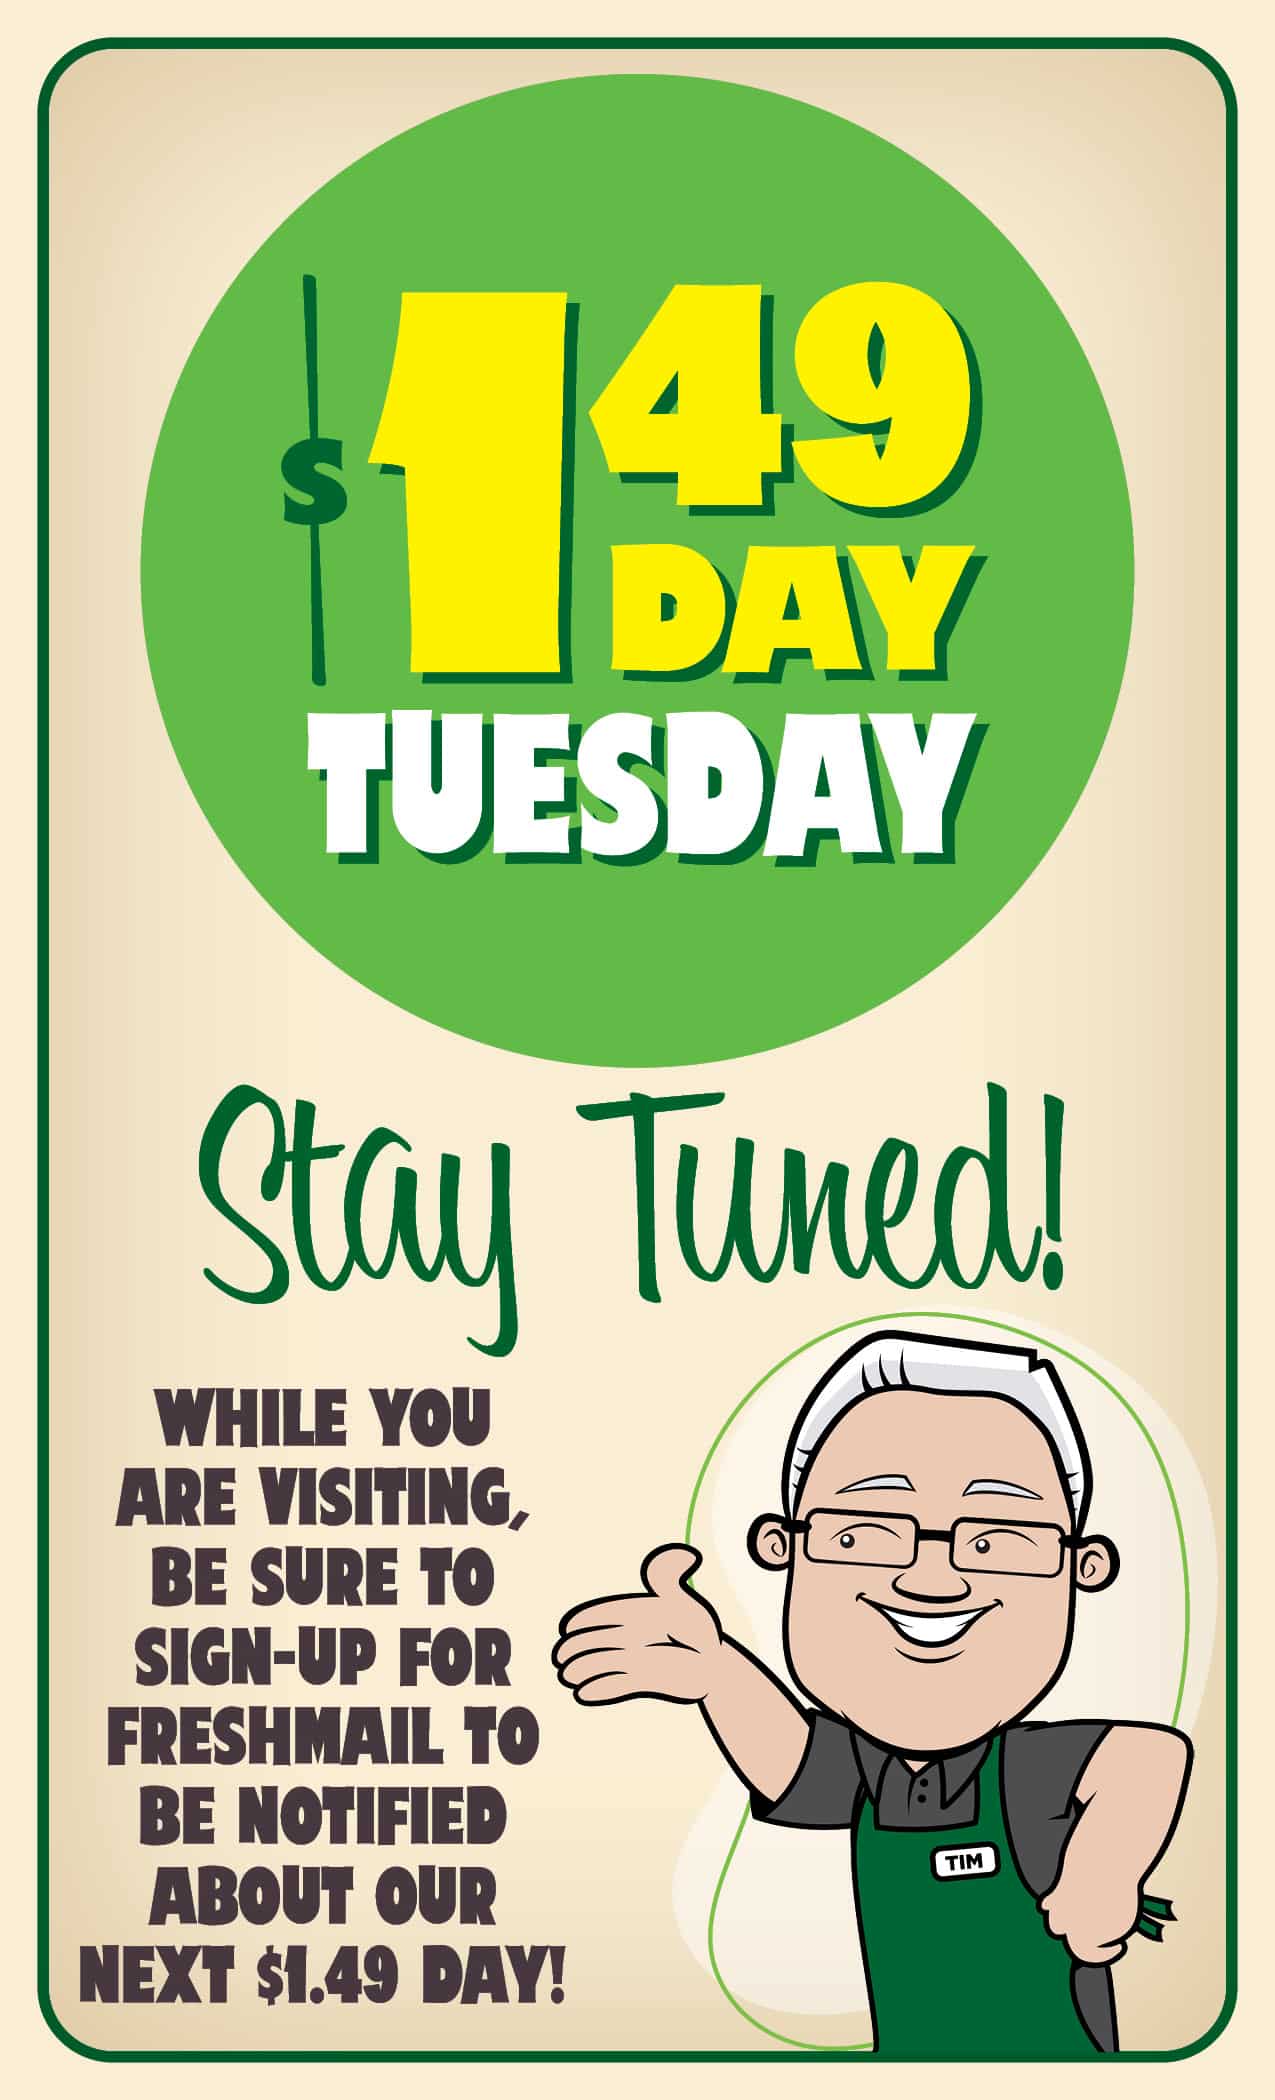 $1.49 Day Thursday October 26th<br />
Hey Savers! TAKE ADVANTAGE OF<br />
THROWBACK PRICES<br />
FOR ONE DAY ONLY.<br />
COME BACK TUESDAY<br />
NIGHT TO SEE THE<br />
SELECTED ITEMS!<br />
THE STORE OPENS AT<br />
7 AM SHOP EARLY!<br />
DON’T MISS THESE<br />
INCREDIBLE<br />
THROWBACK DEALS!<br />
*Prices available on promotion date only. Promotions cannot be combined, including employee discounts. While supplies last.<br />
No rainchecks will be offered. No substitutions allowed. We reserve the right to limit quantities per customer/family to ensure<br />
equitable availability to other customers. All sales are final. We will not make price adjustments for previously purchased products.<br />
We will not hold products for later purchase. See advertisement for full offer details.<br />
WHILE SUPPLIES LAST. LIMITS APPLY. OCT. 26th<br />
THURSDAY